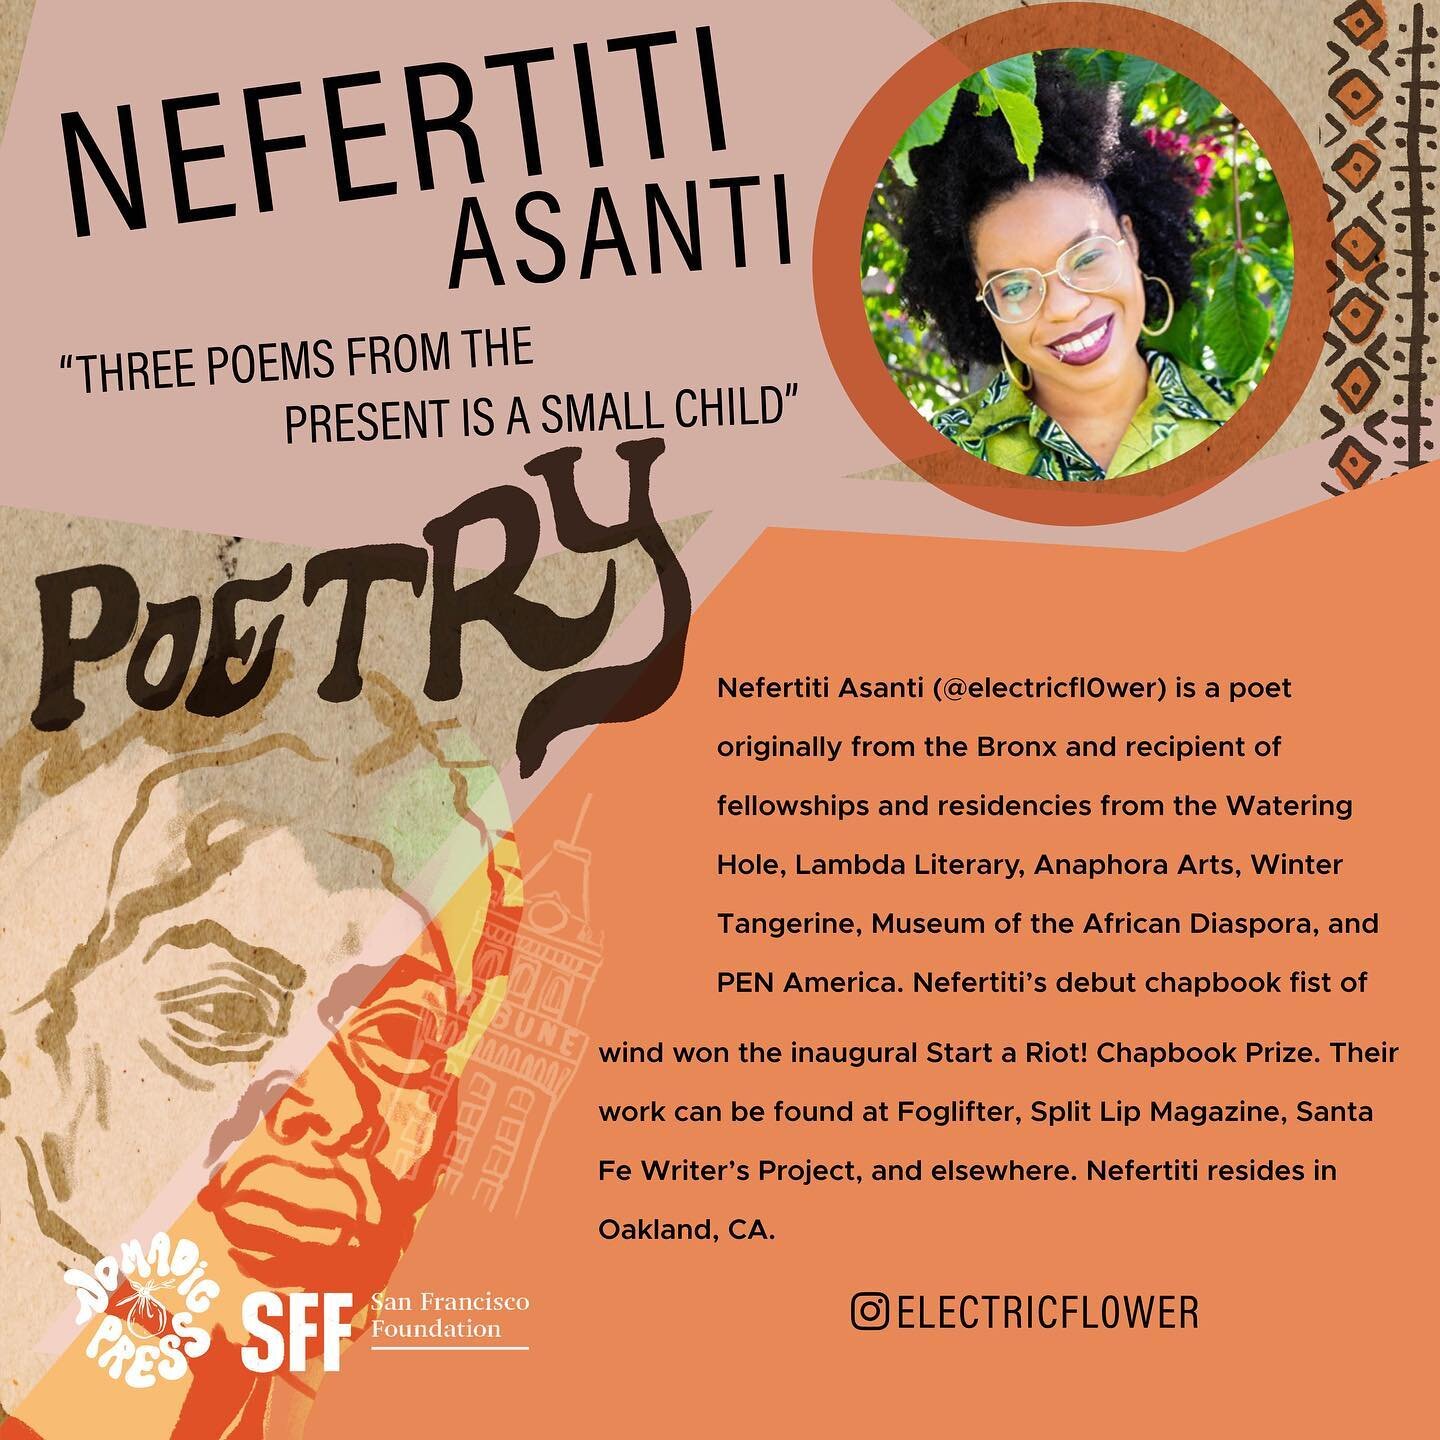 Congratulations to Nefertiti Asanti, recipient of the 2023 San Francisco Foundation/Nomadic Press Literary Award in Poetry. Nefertiti won $5000 for three poems from a larger body of work titled &ldquo;the present is a small child&rdquo;. Join us in c